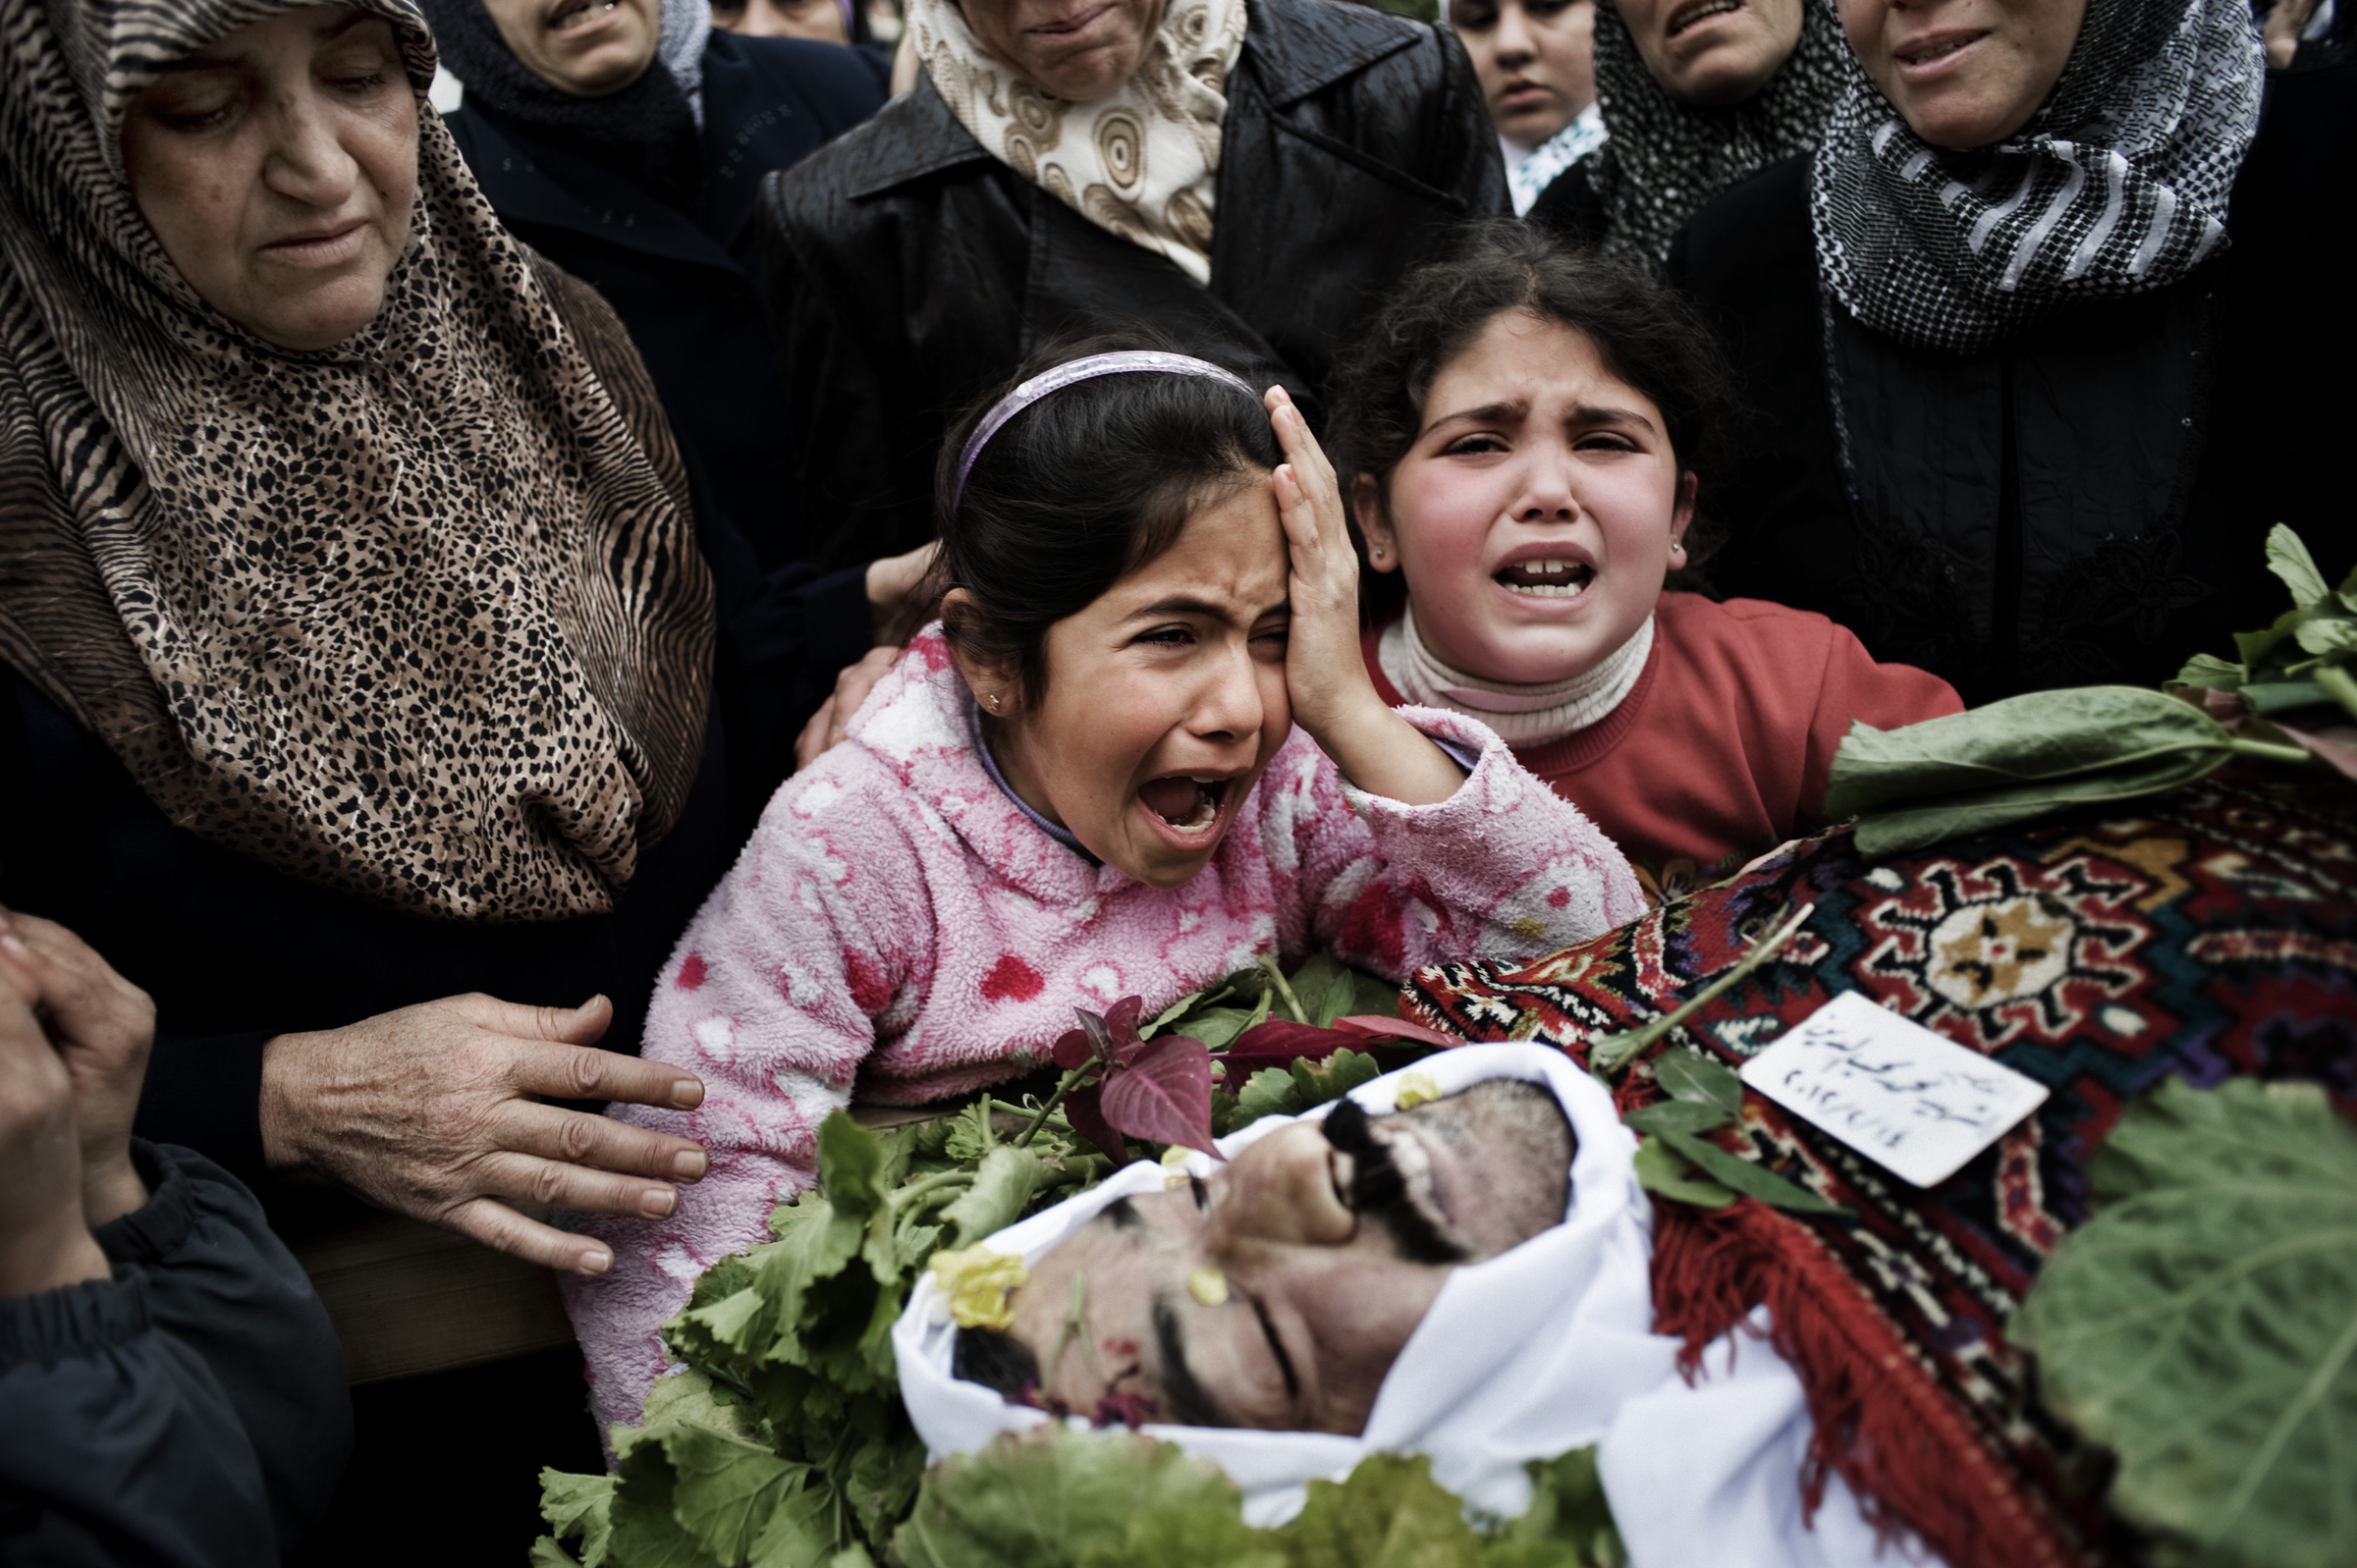 General News, 1st Prize Stories Alessio Romenzi, Italy. 14 February 2012 Al-Qusayr, Syria. A child mourns her father, who was kidnapped, tortured and killed by shabiha (government militias) with other two men. Their bodies were abandoned in a main street. The civilian unrest in the Syrian Arab Republic began in March 2011 and continues to affect people, particularly in the most vulnerable segments of the population. At least 60,000 people have been killed since uprising began, according to the United Nations (UN), and the number of Syrian refugees registered by the UN in the Middle East and North Africa has surpassed half a million. The situation continues to deteriorate in villages and cities in the country, leaving people without protection, shelter, food and water and facing fear every day.